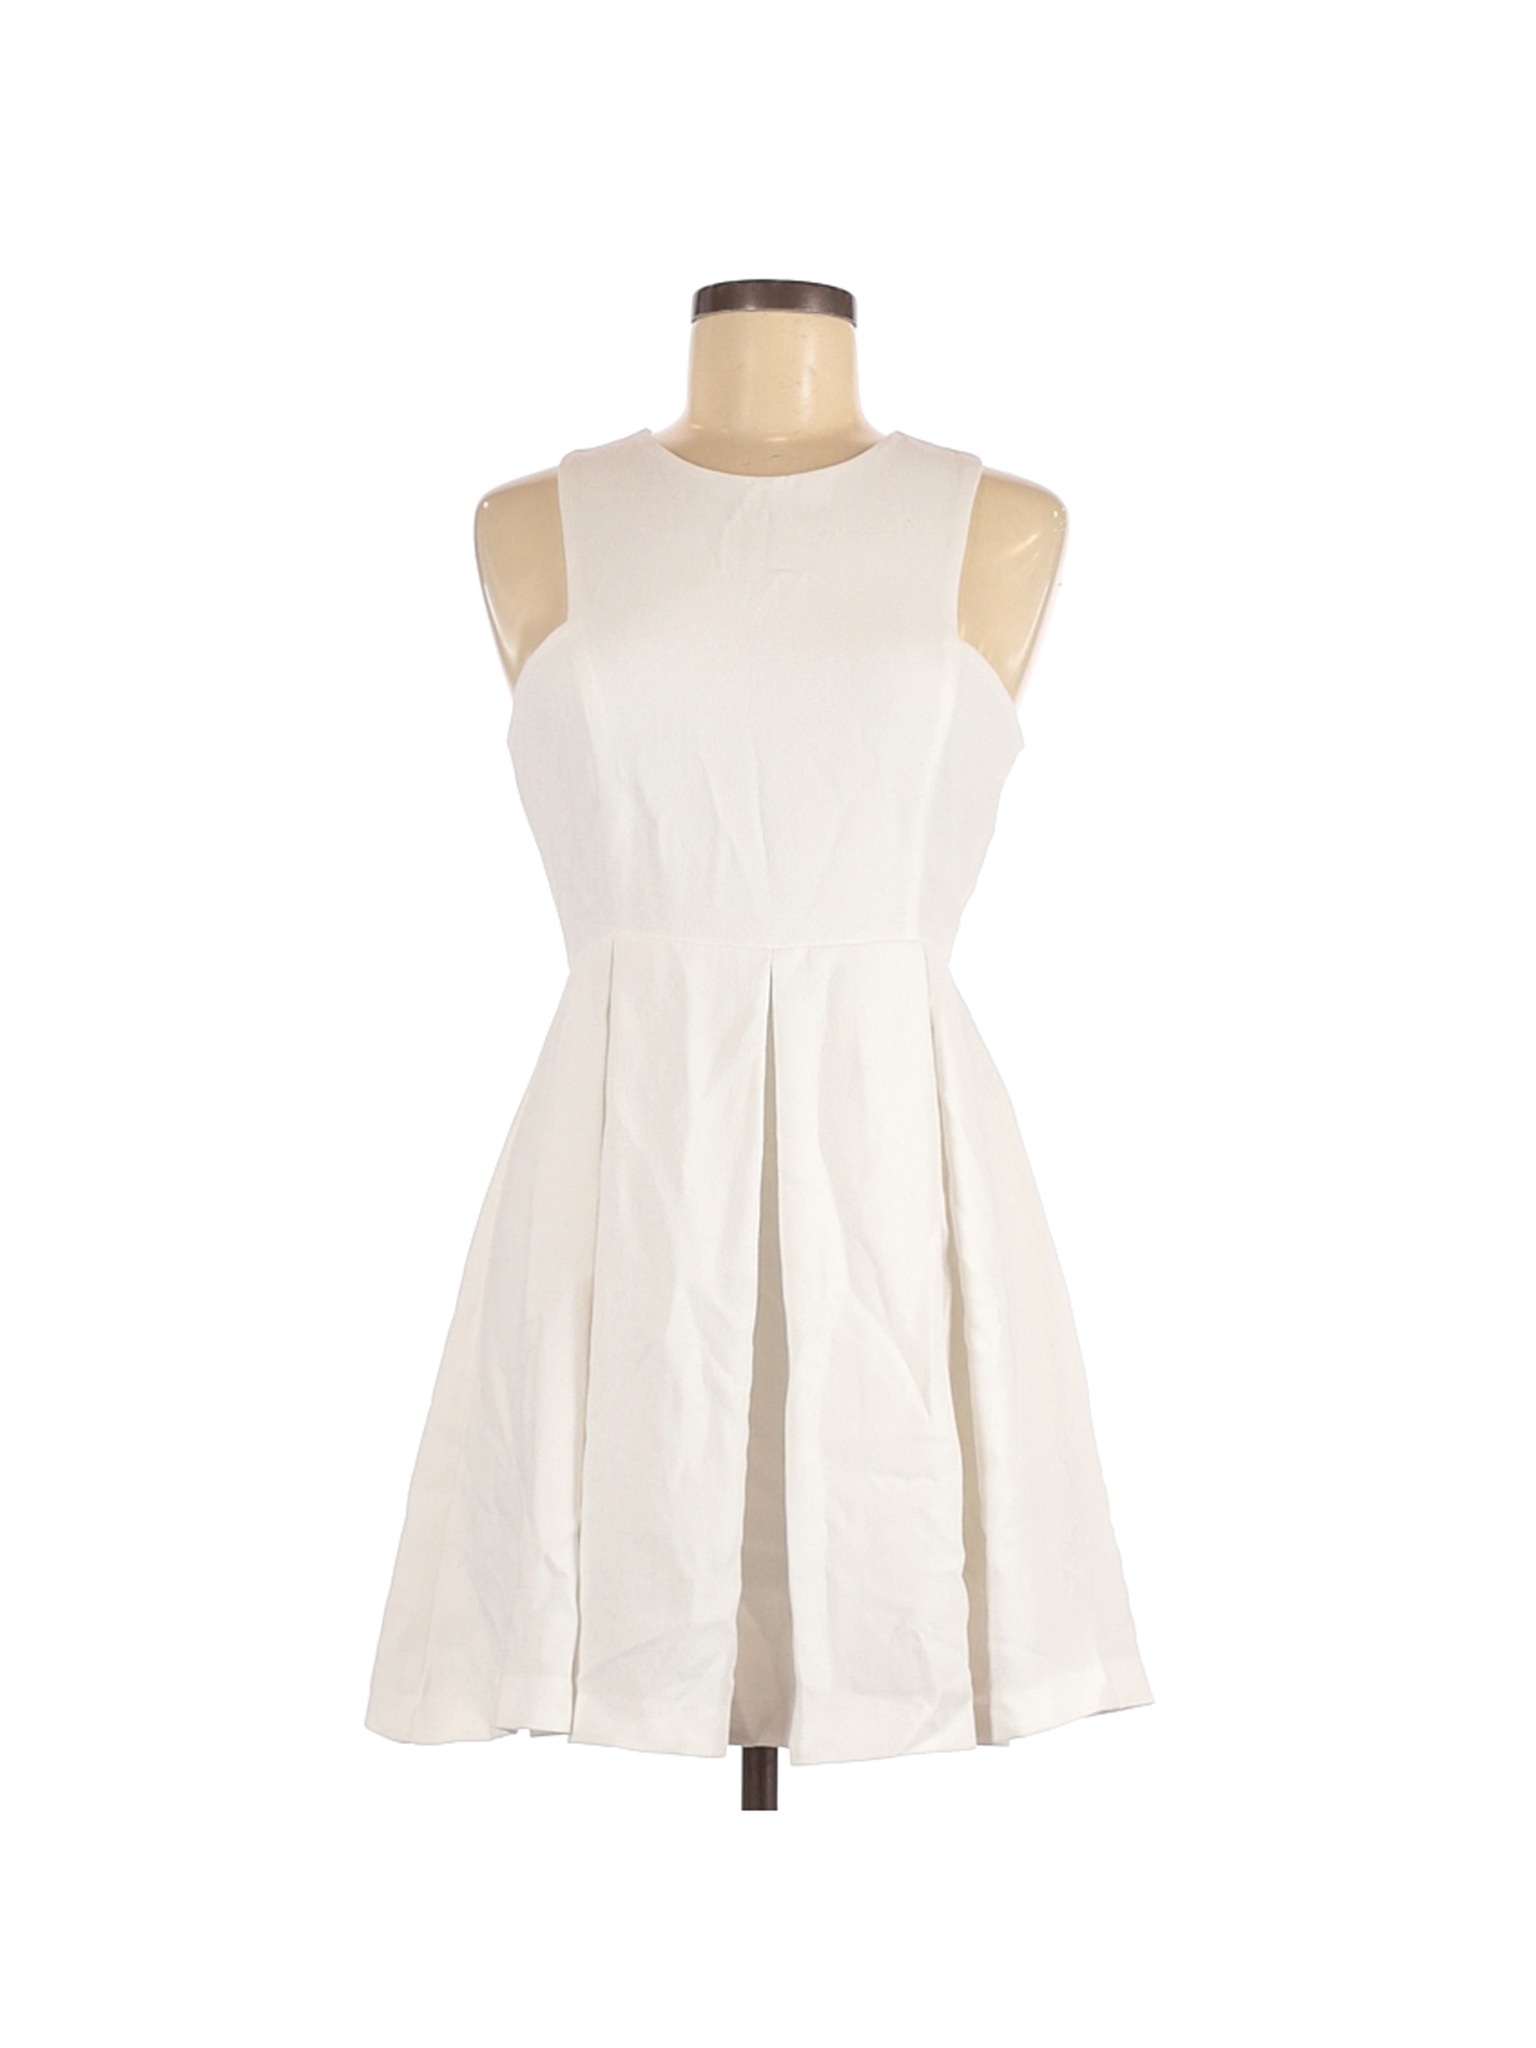 Glad cooperate Danube Lulu's 100% Polyester White Casual Dress Size M - 78% off | thredUP